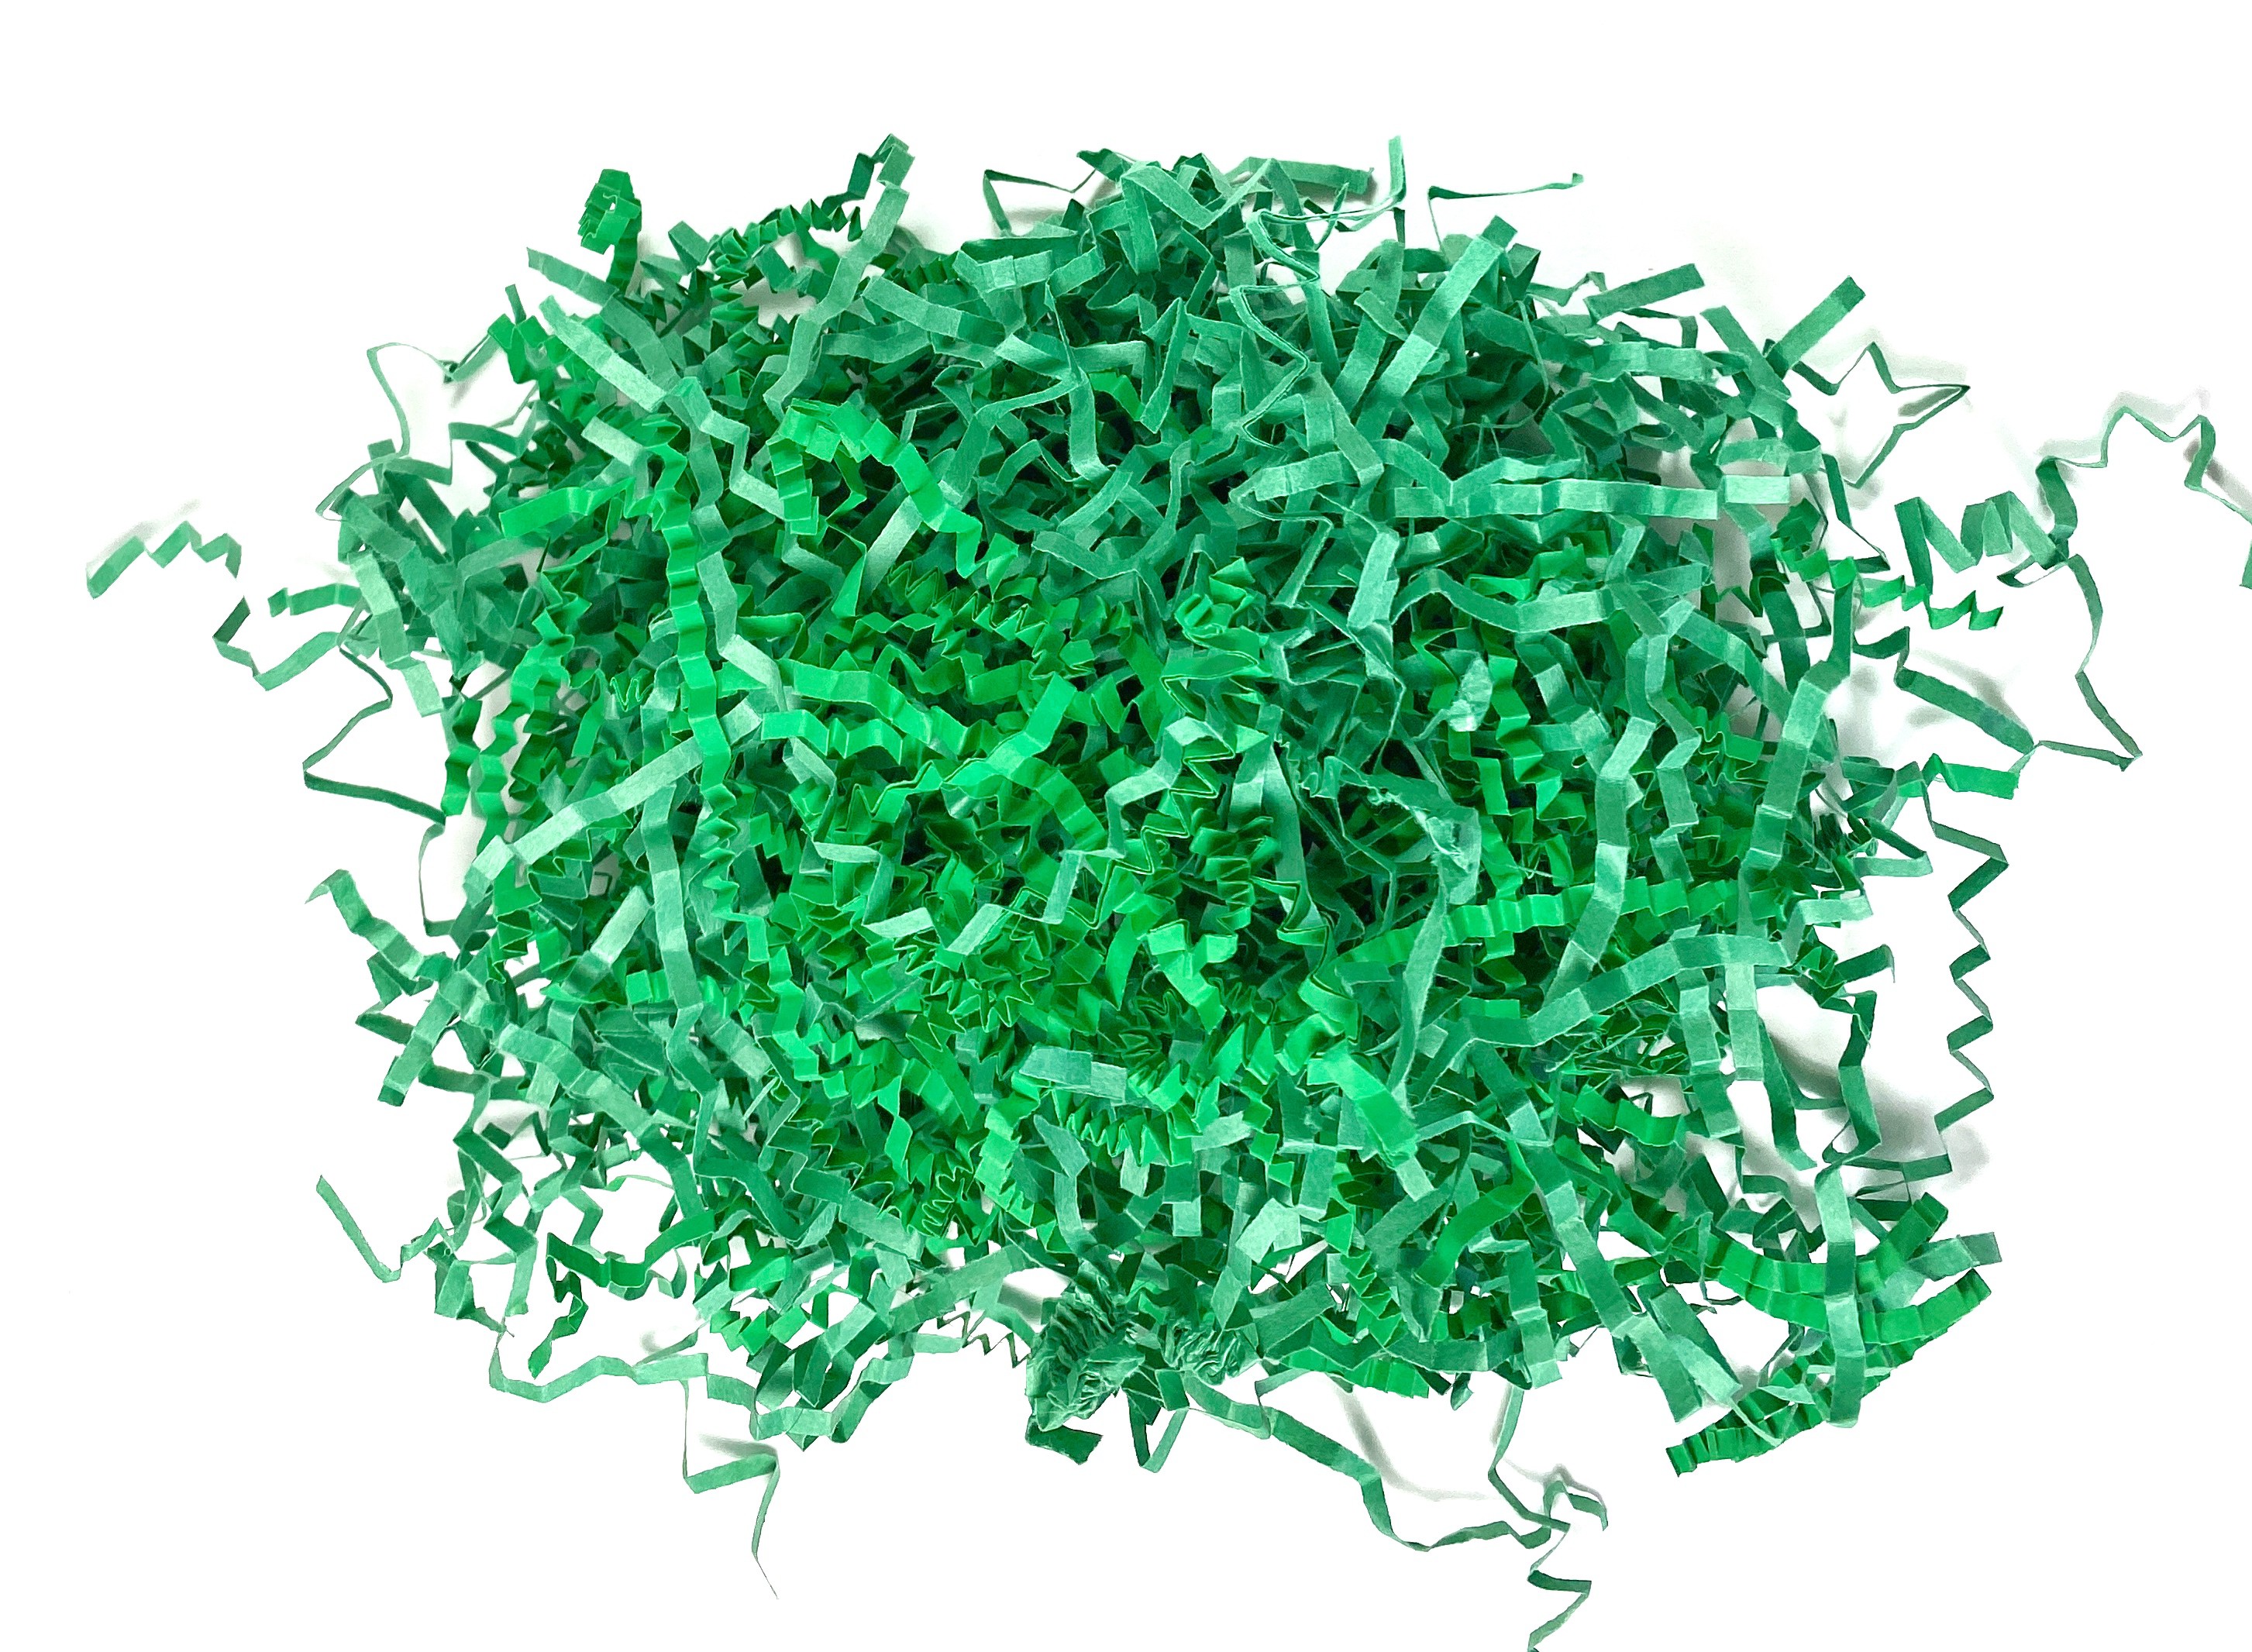 A pile of green shredded paper.